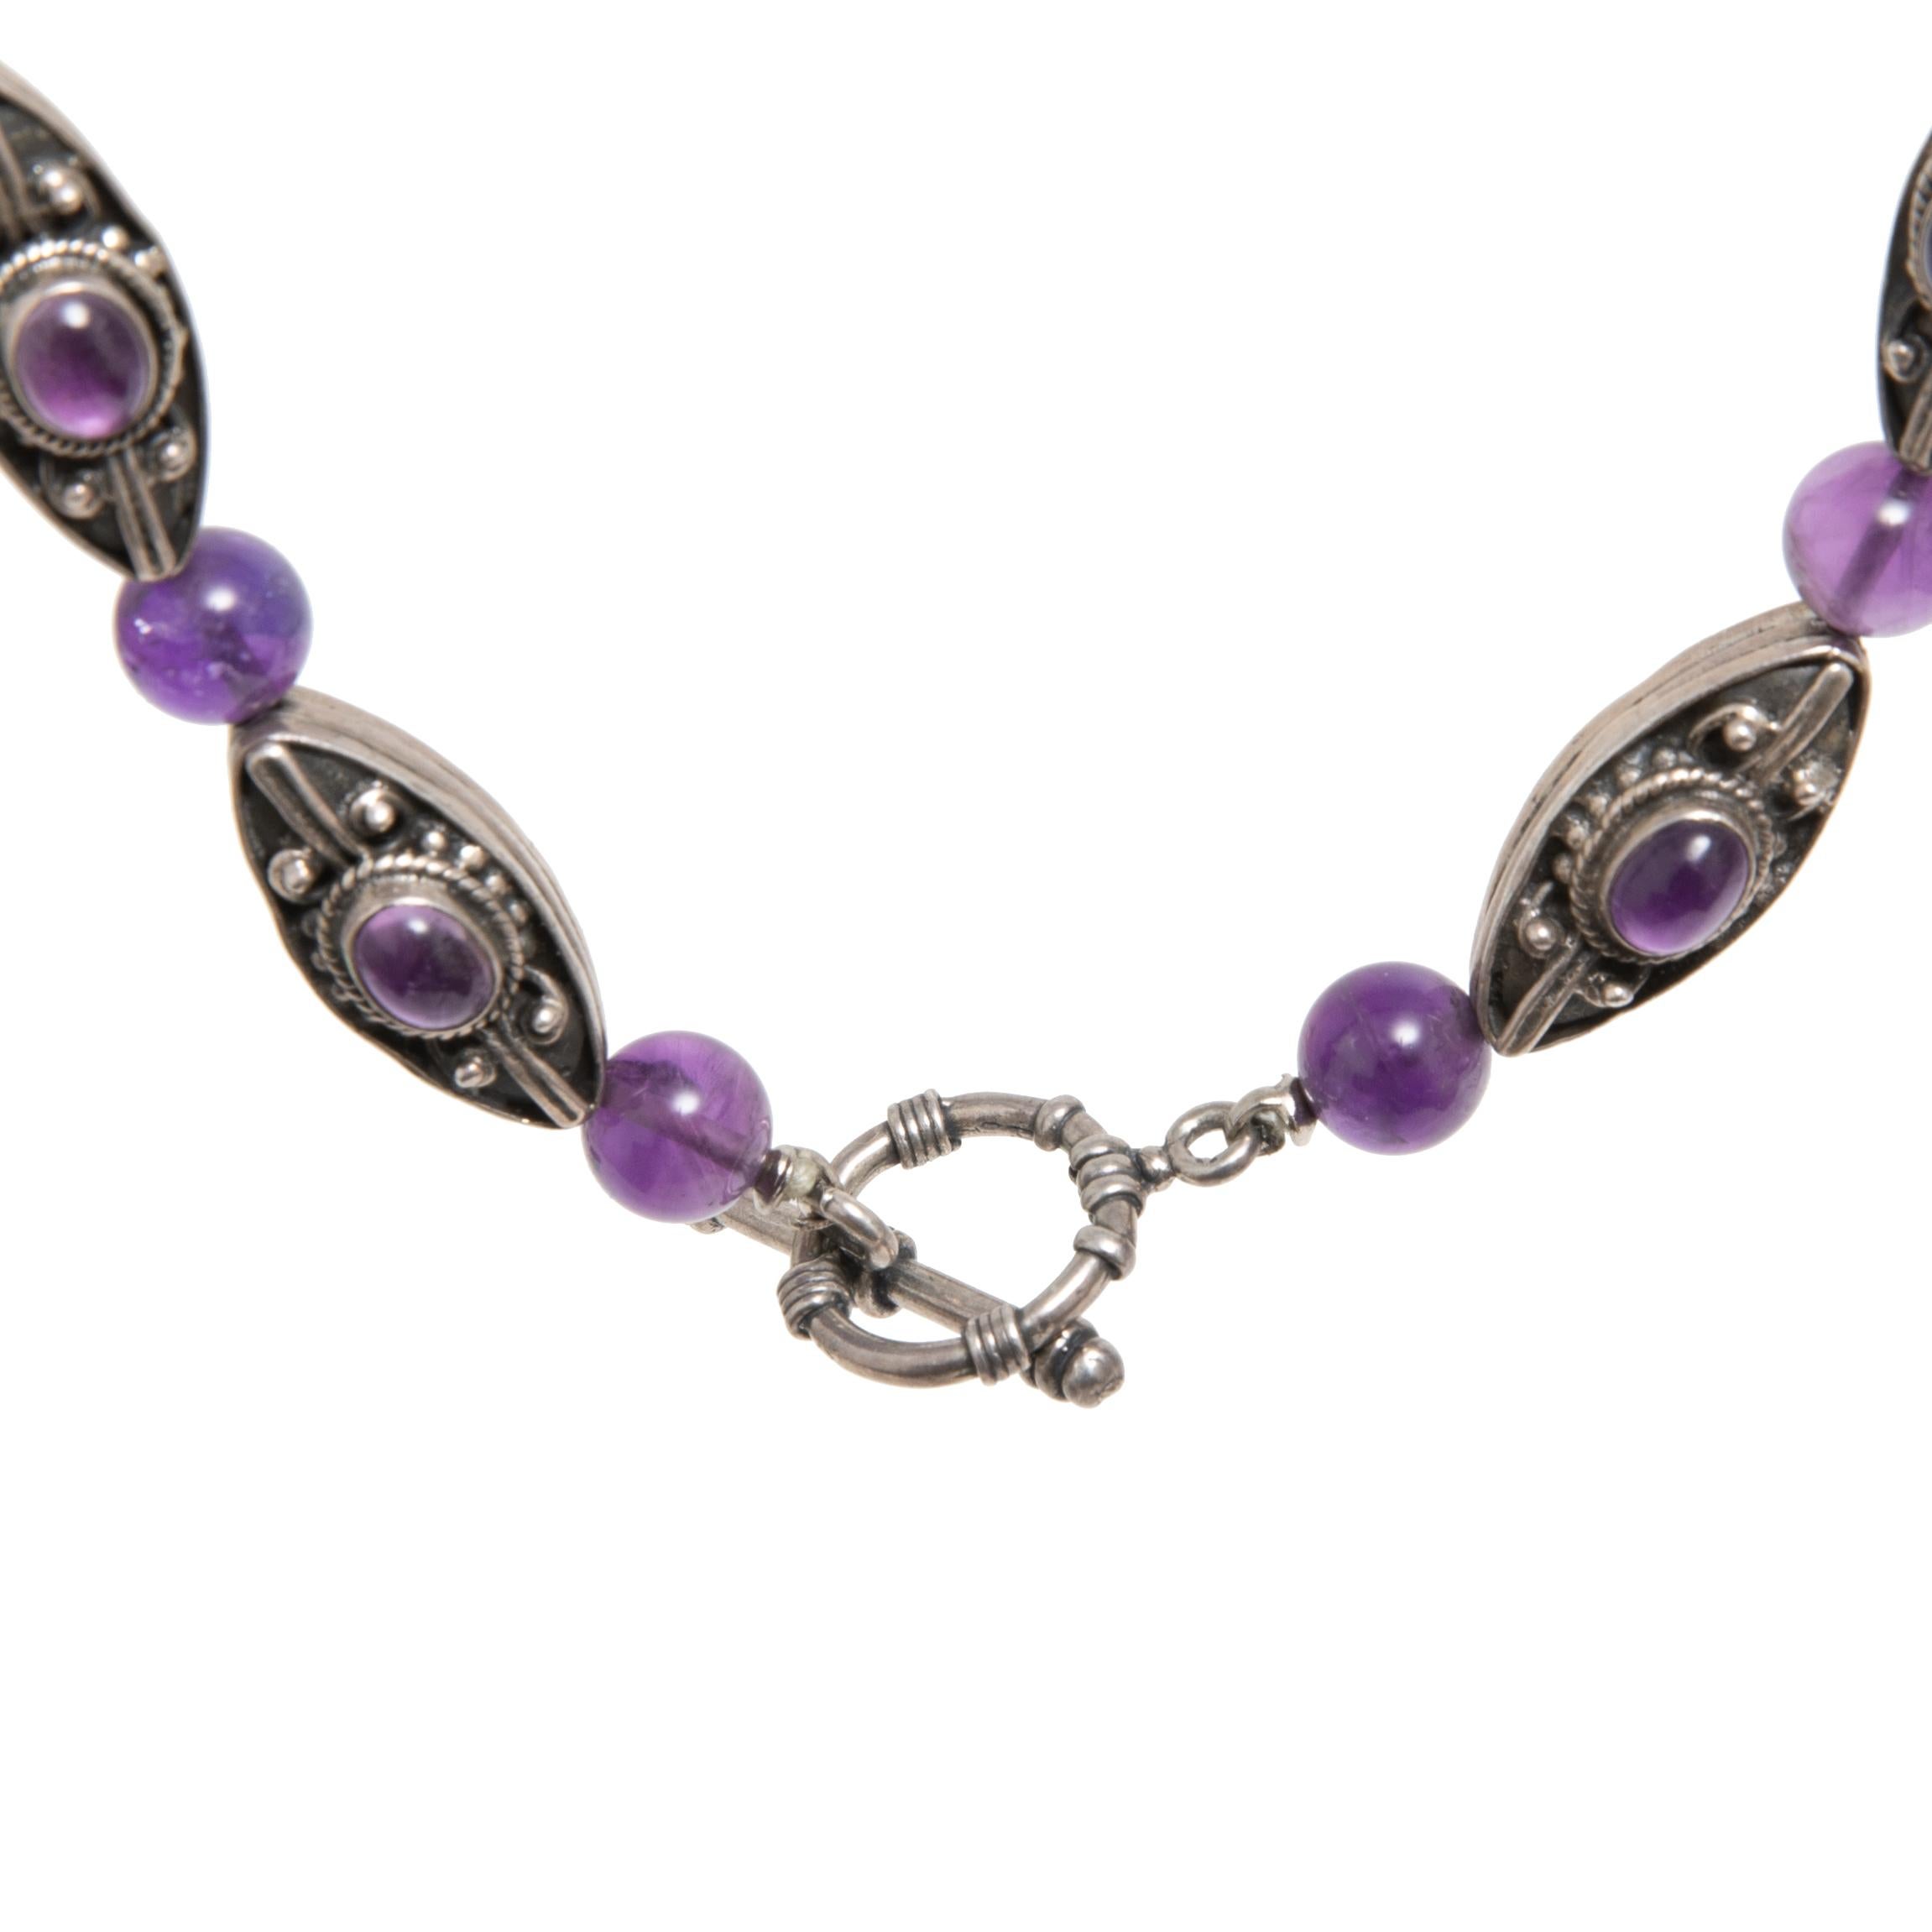 Women's Silver and Amethyst Oval Cabochon and Beads Necklace